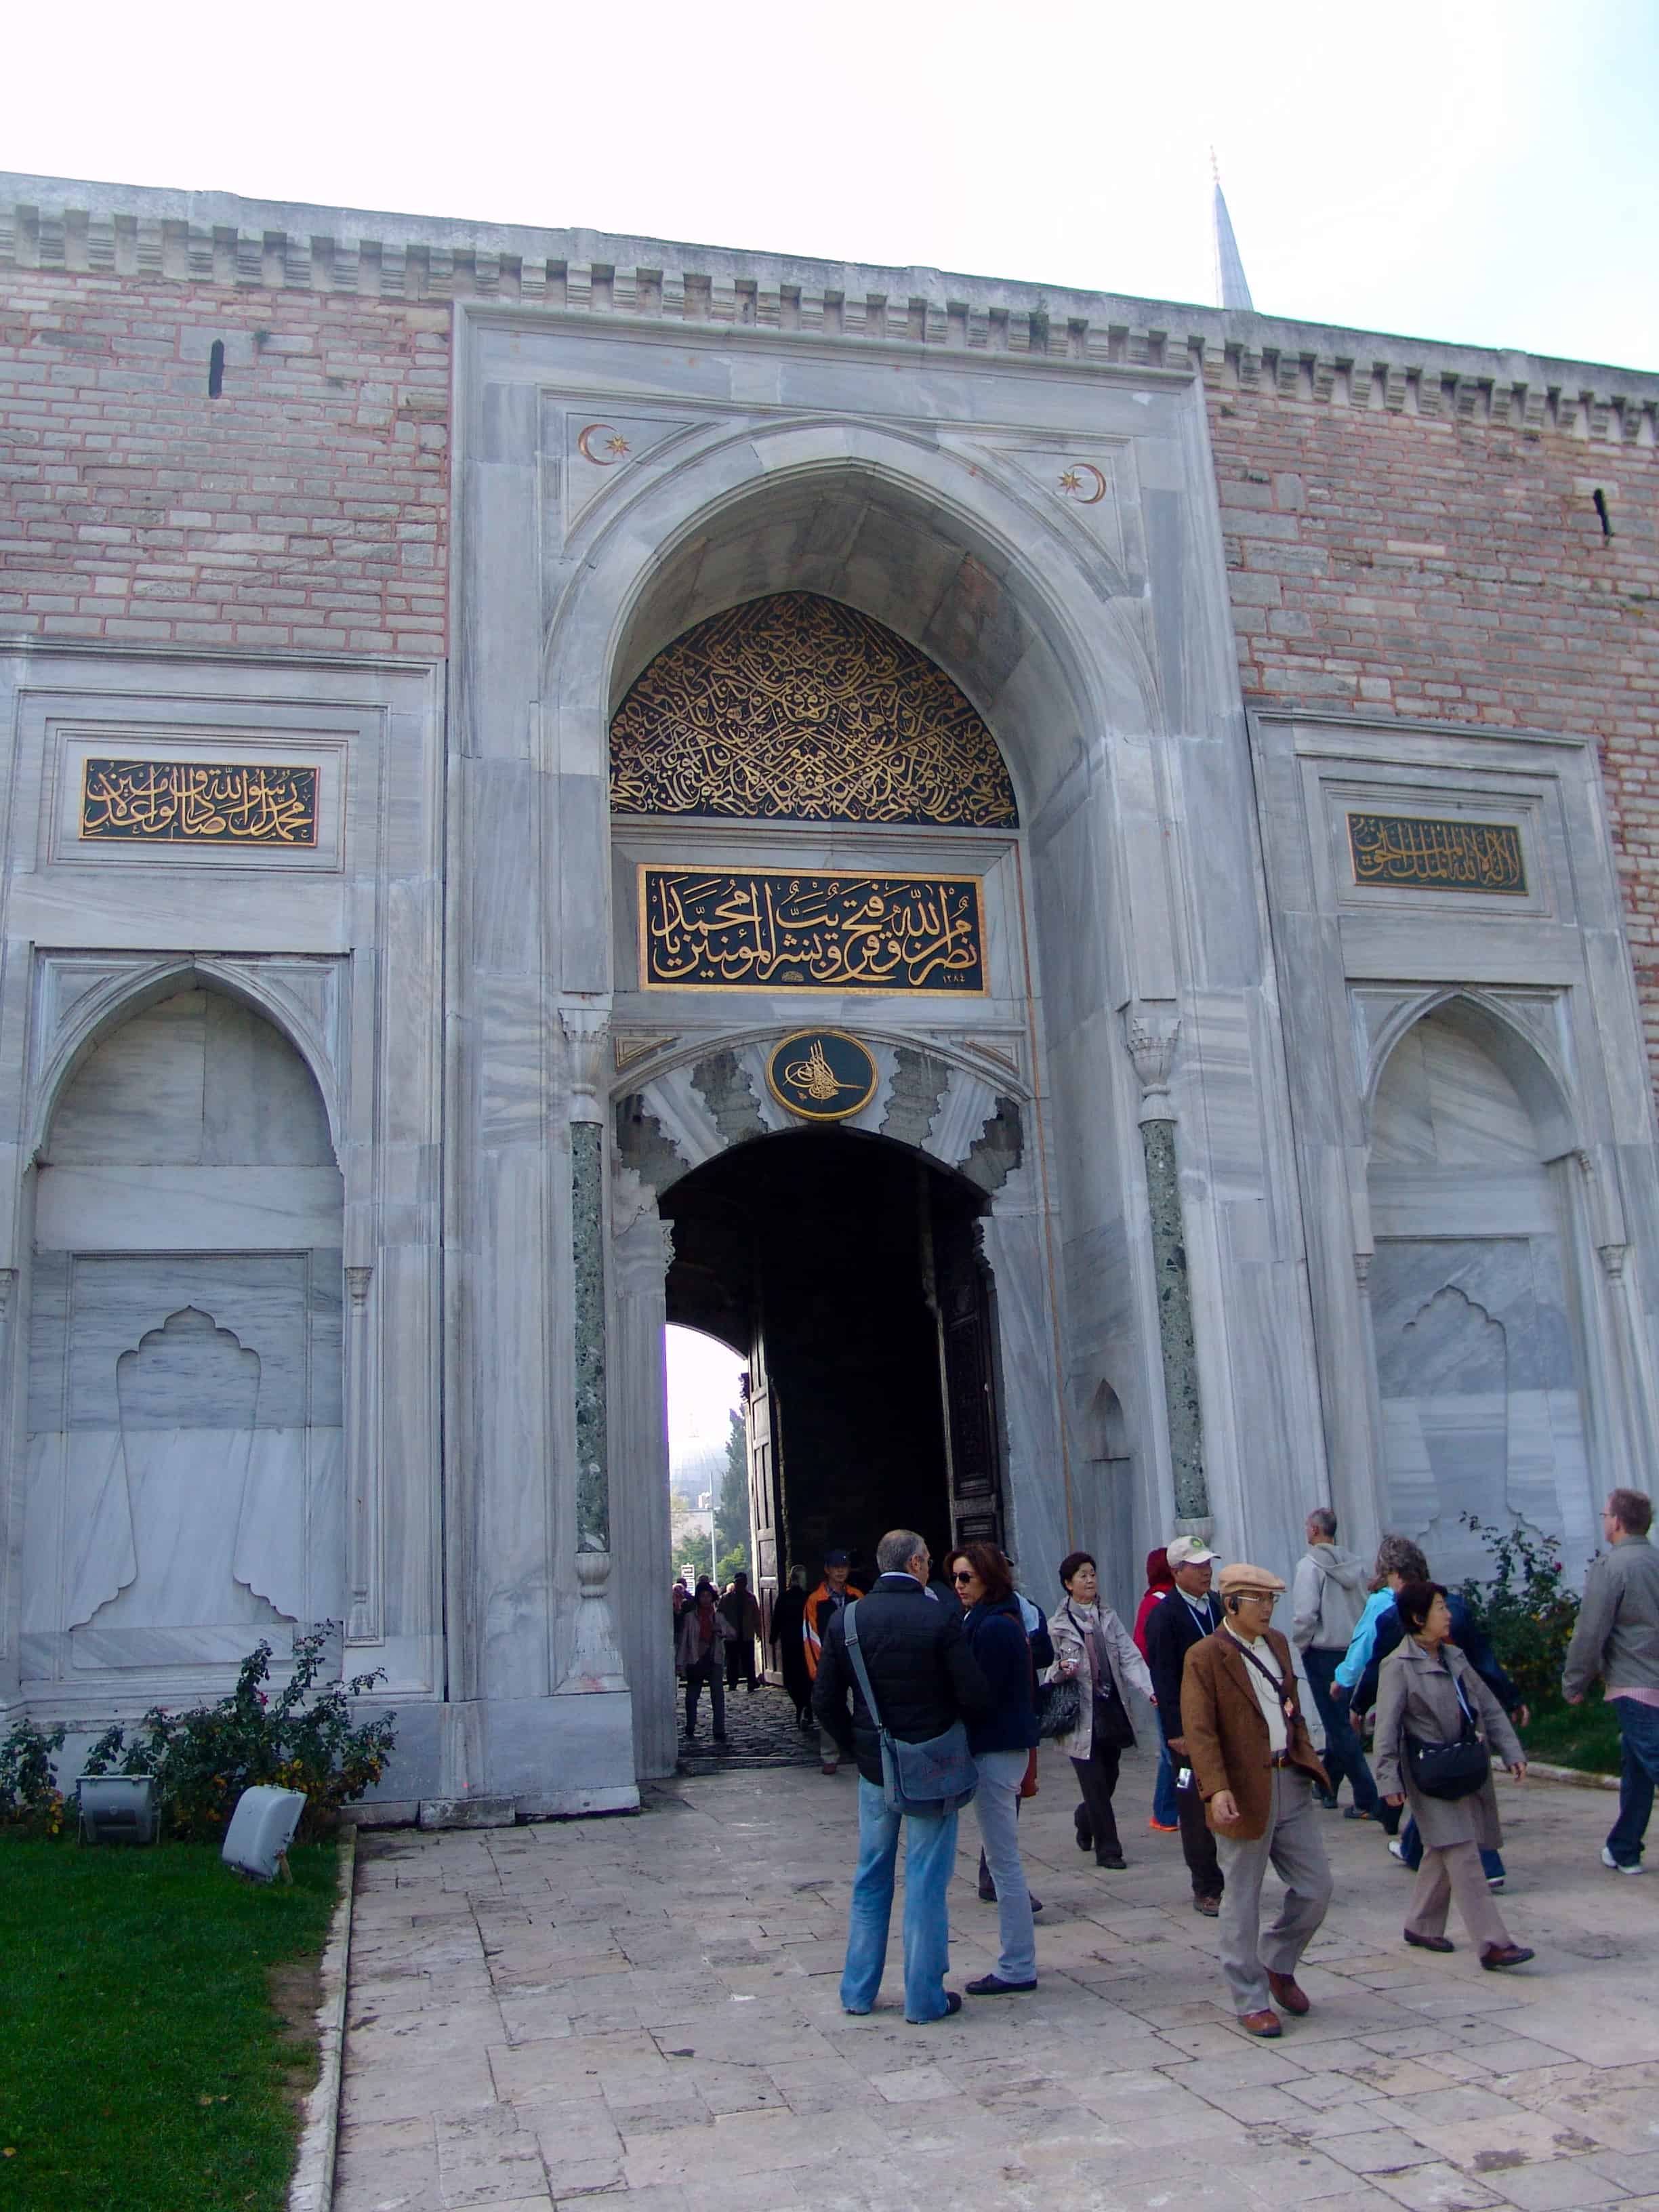 Imperial Gate from the inside at Topkapi Palace in Istanbul, Turkey